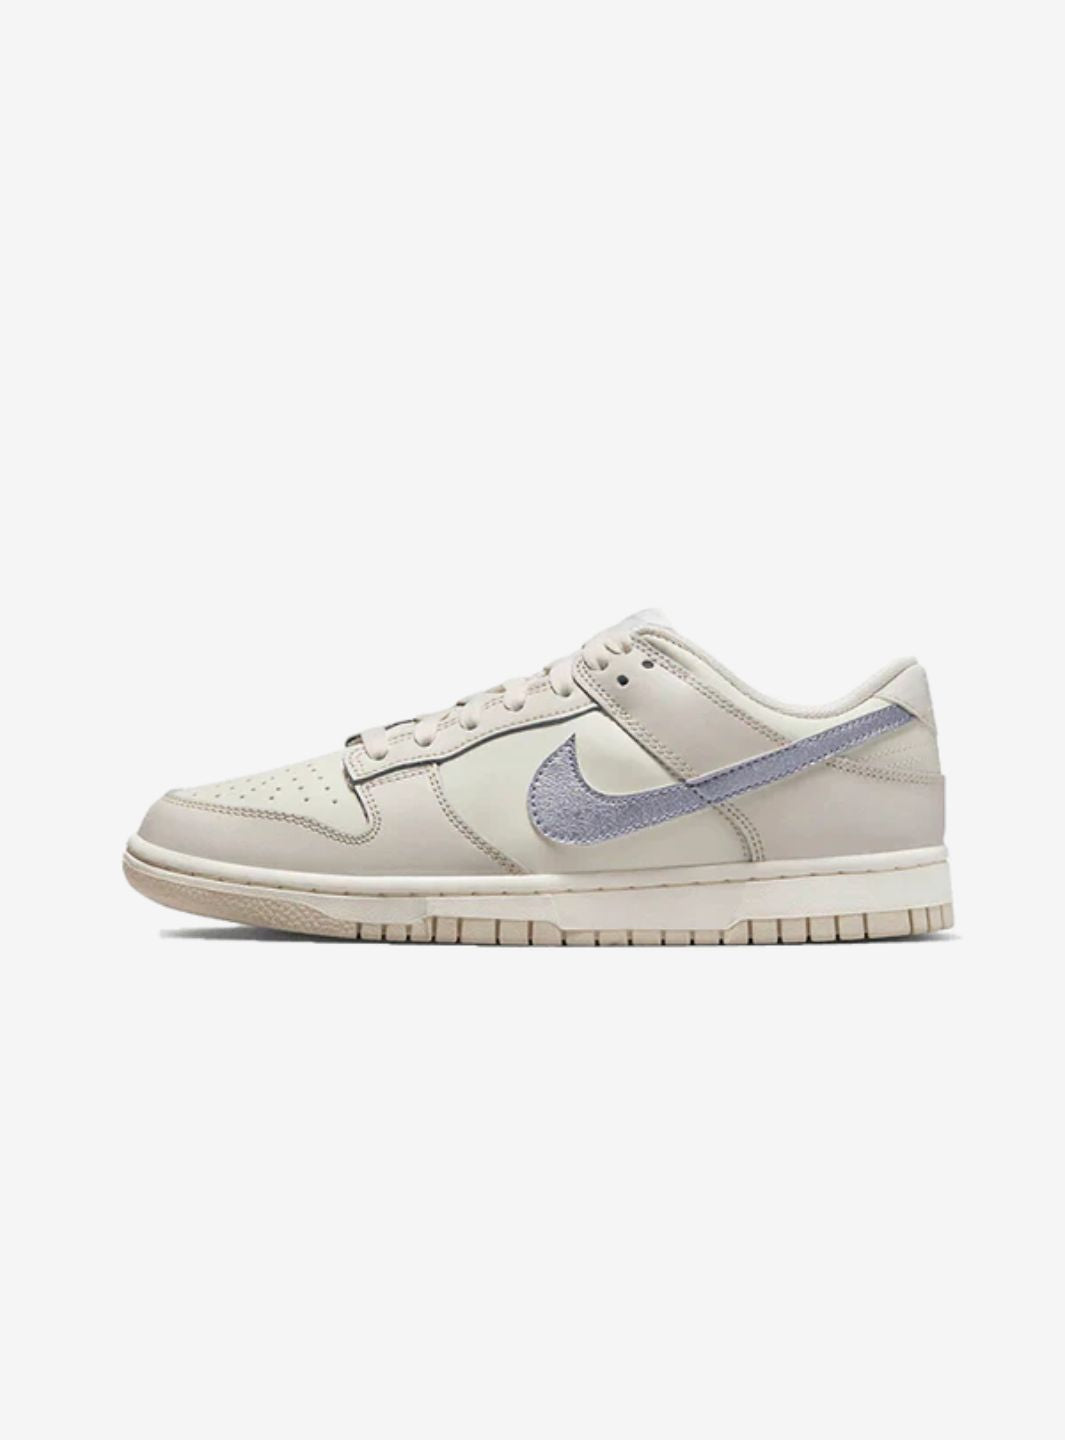 Nike Dunk Low Essential Sail Oxygen Purple - DX5930-100 | ResellZone